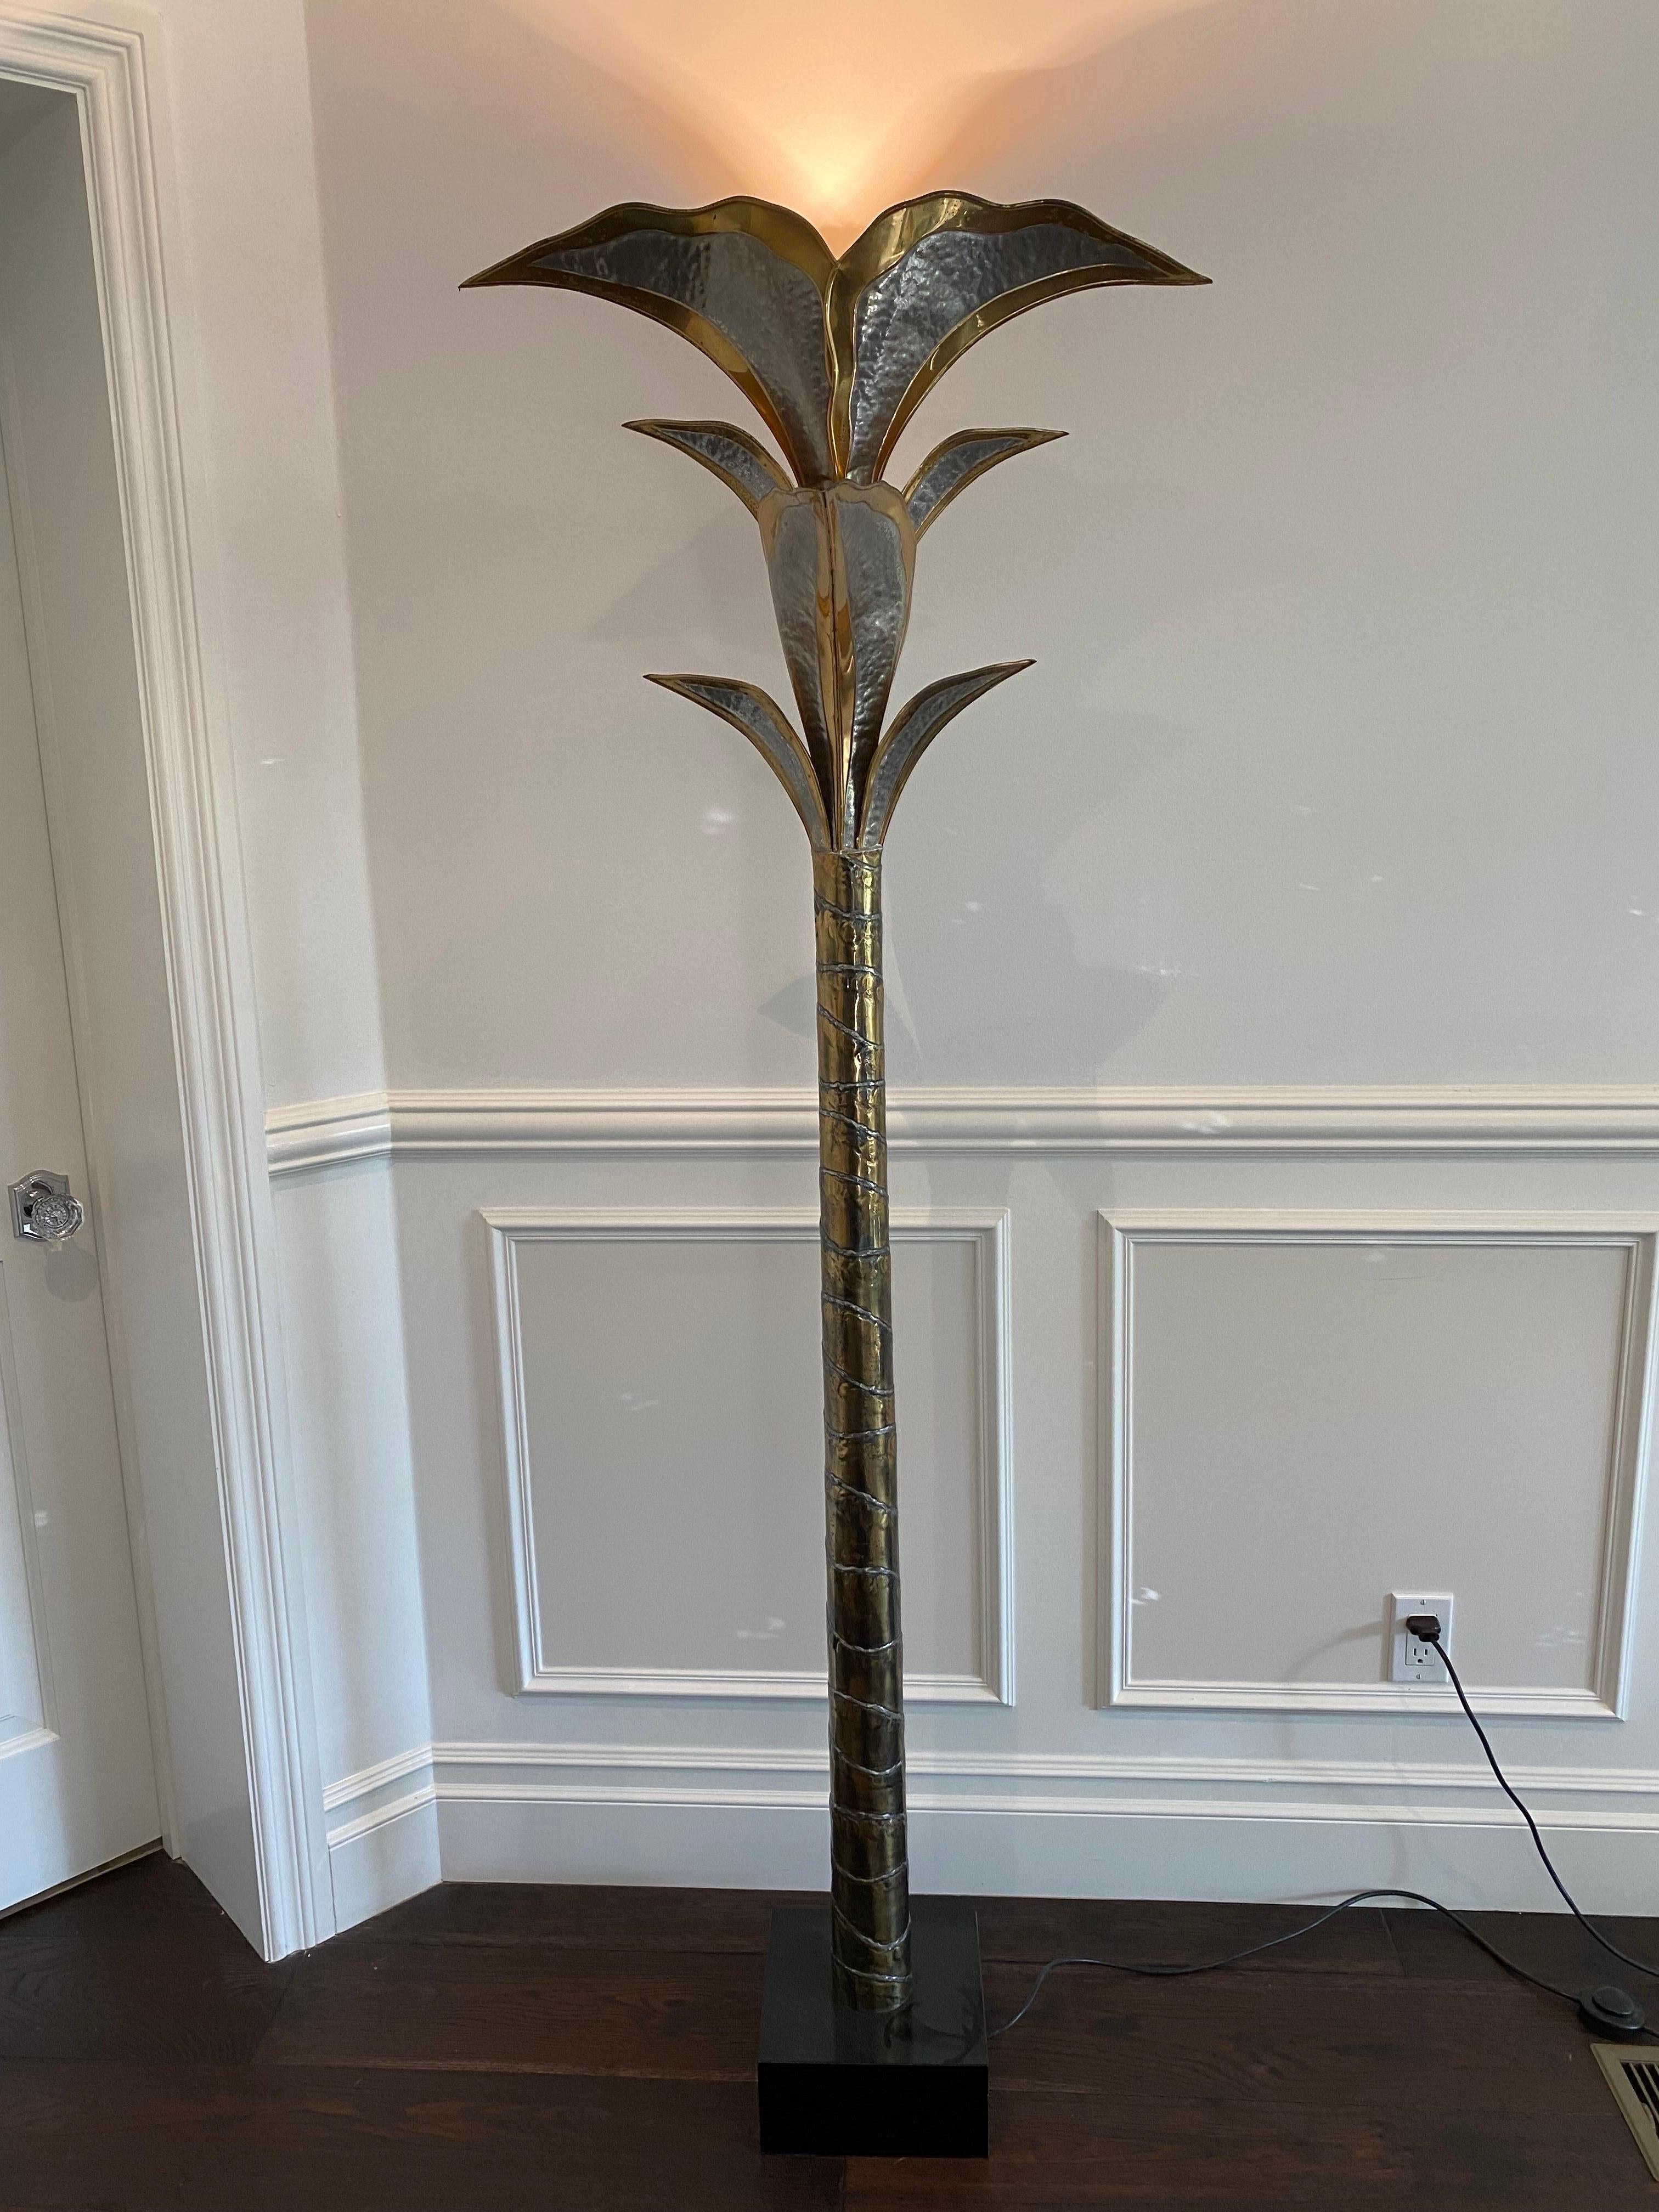 Brass and pewter leaf floor lamp attributed to Henri Fernandez.
Measures: Base is 9